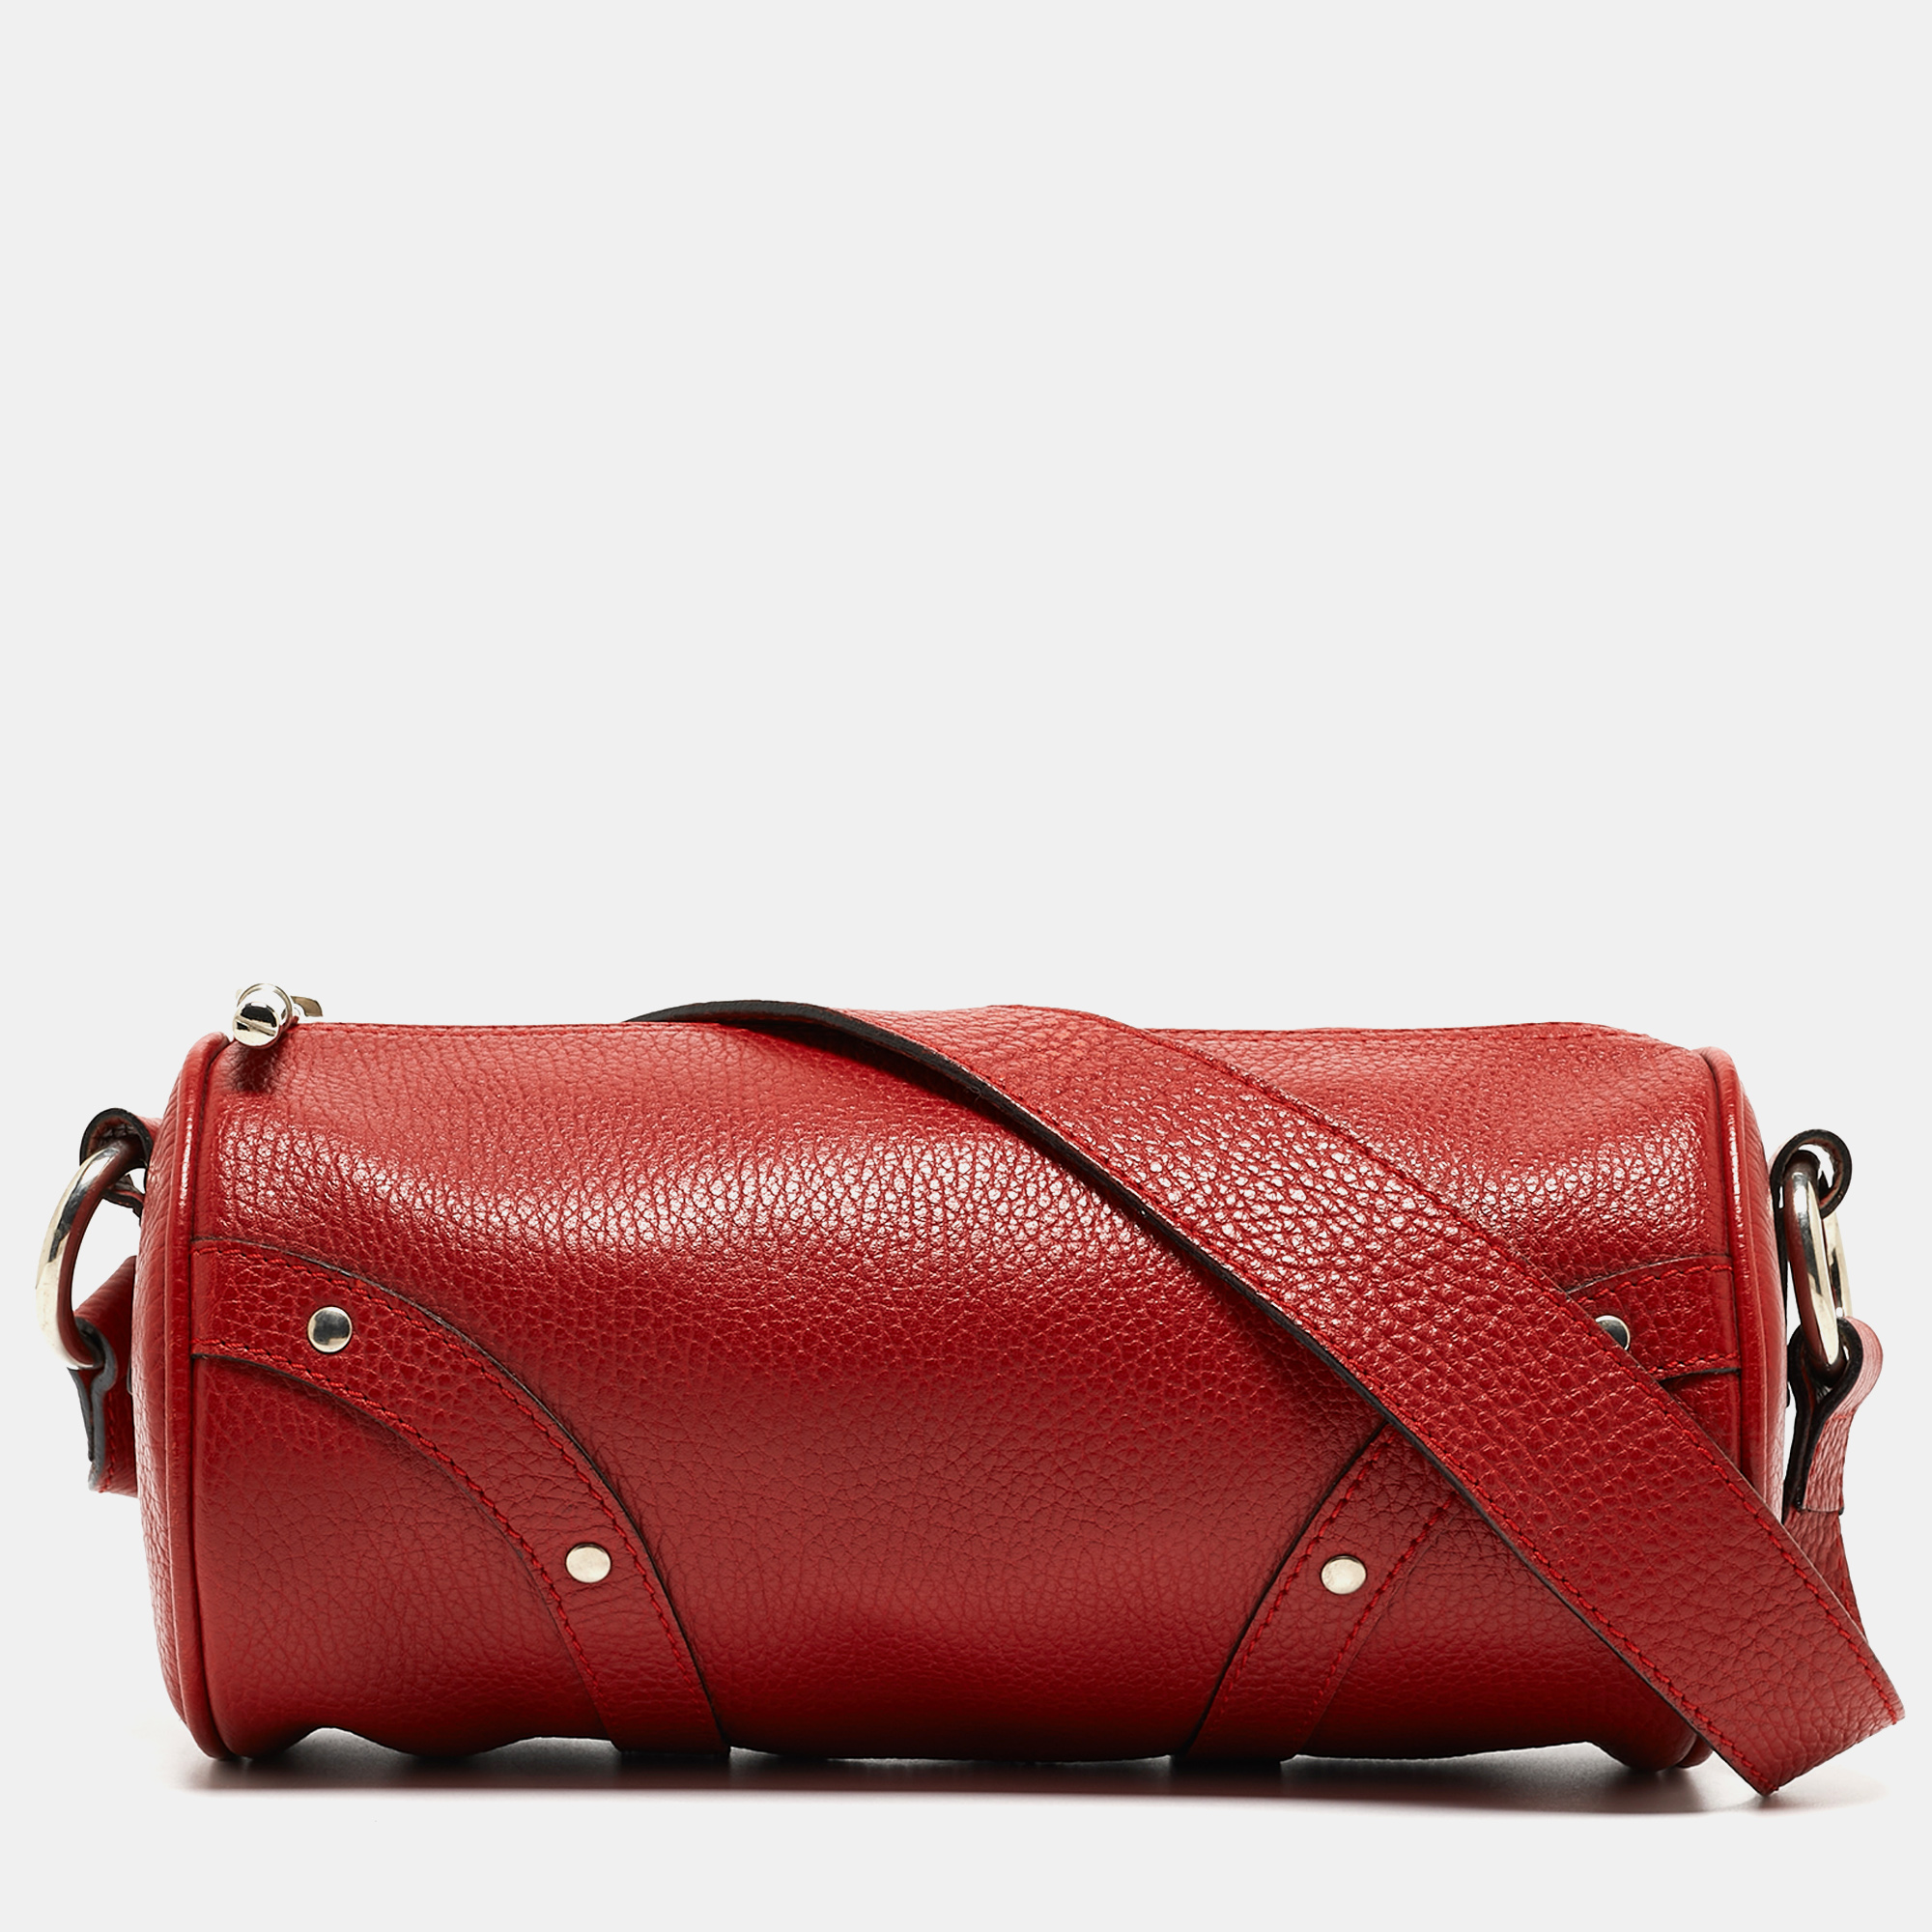 Pre-owned Burberry Red Leather Barrel Bag